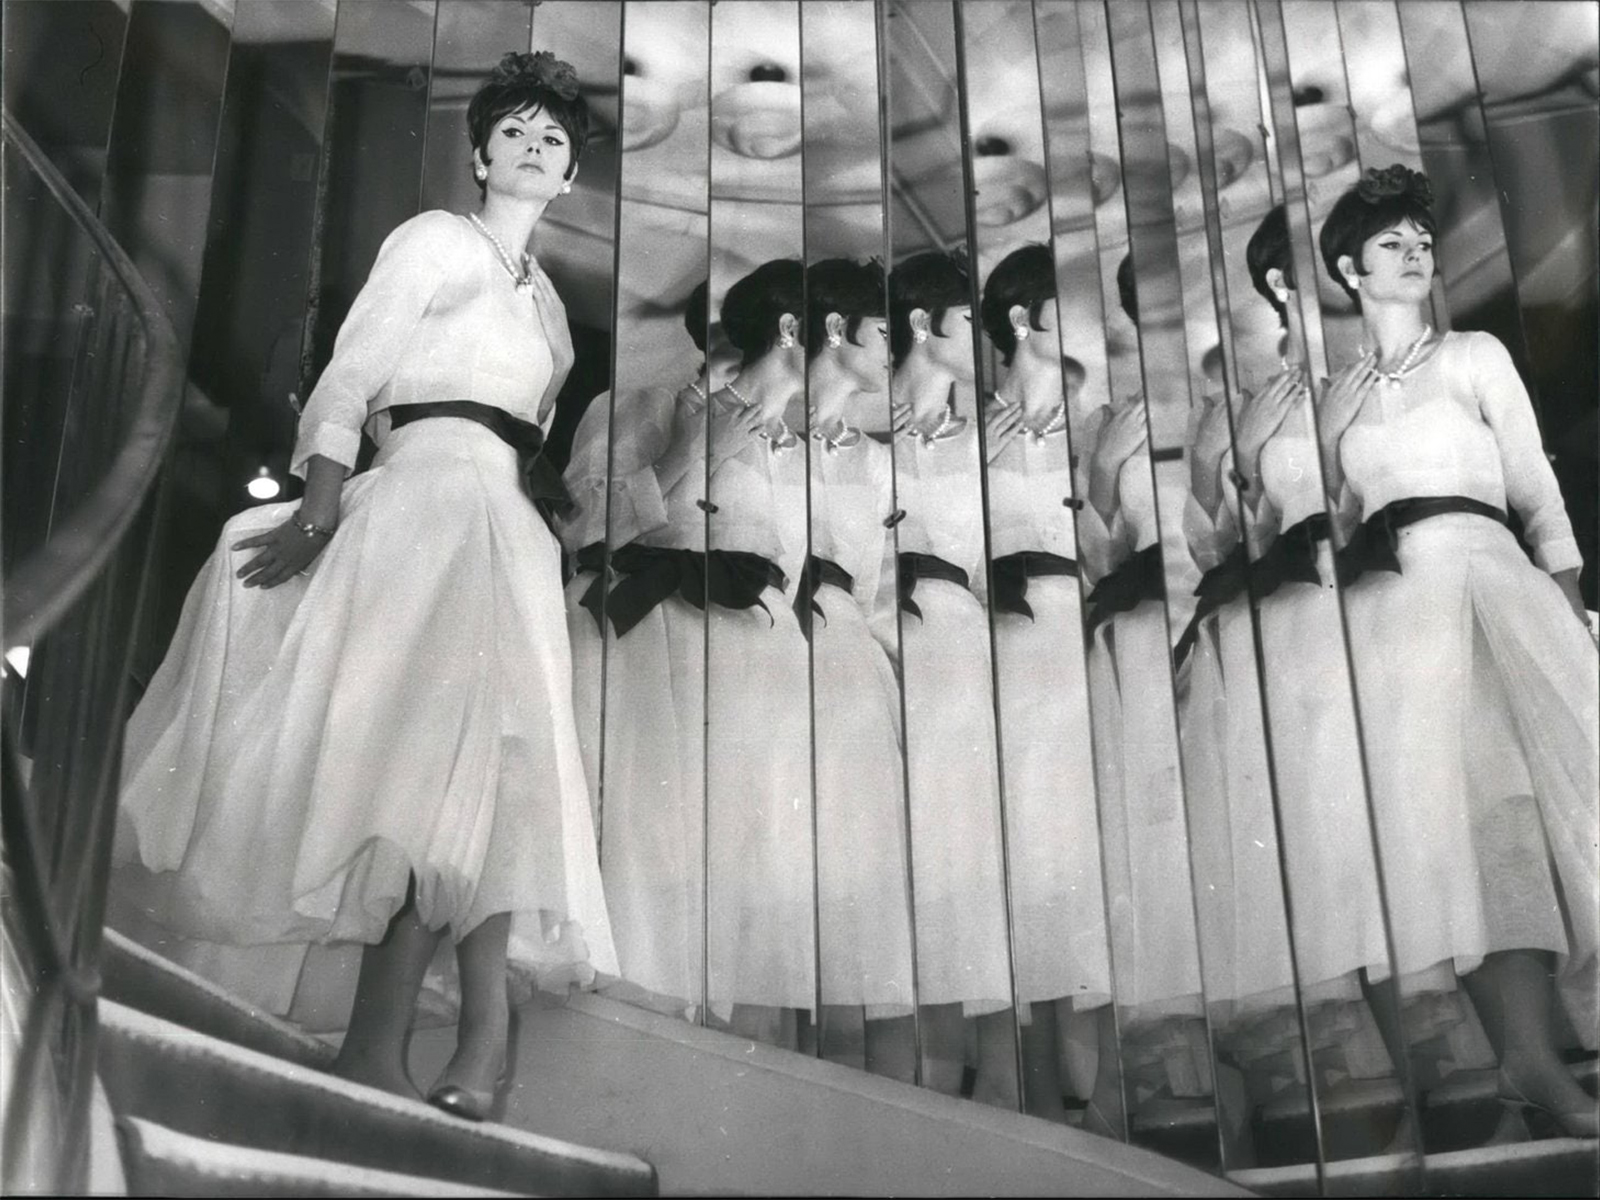 A model in a 1963 Chanel design, descending the stairs of the couturière’s atelier. ZUMA Press, Inc. / Alamy Stock Photo